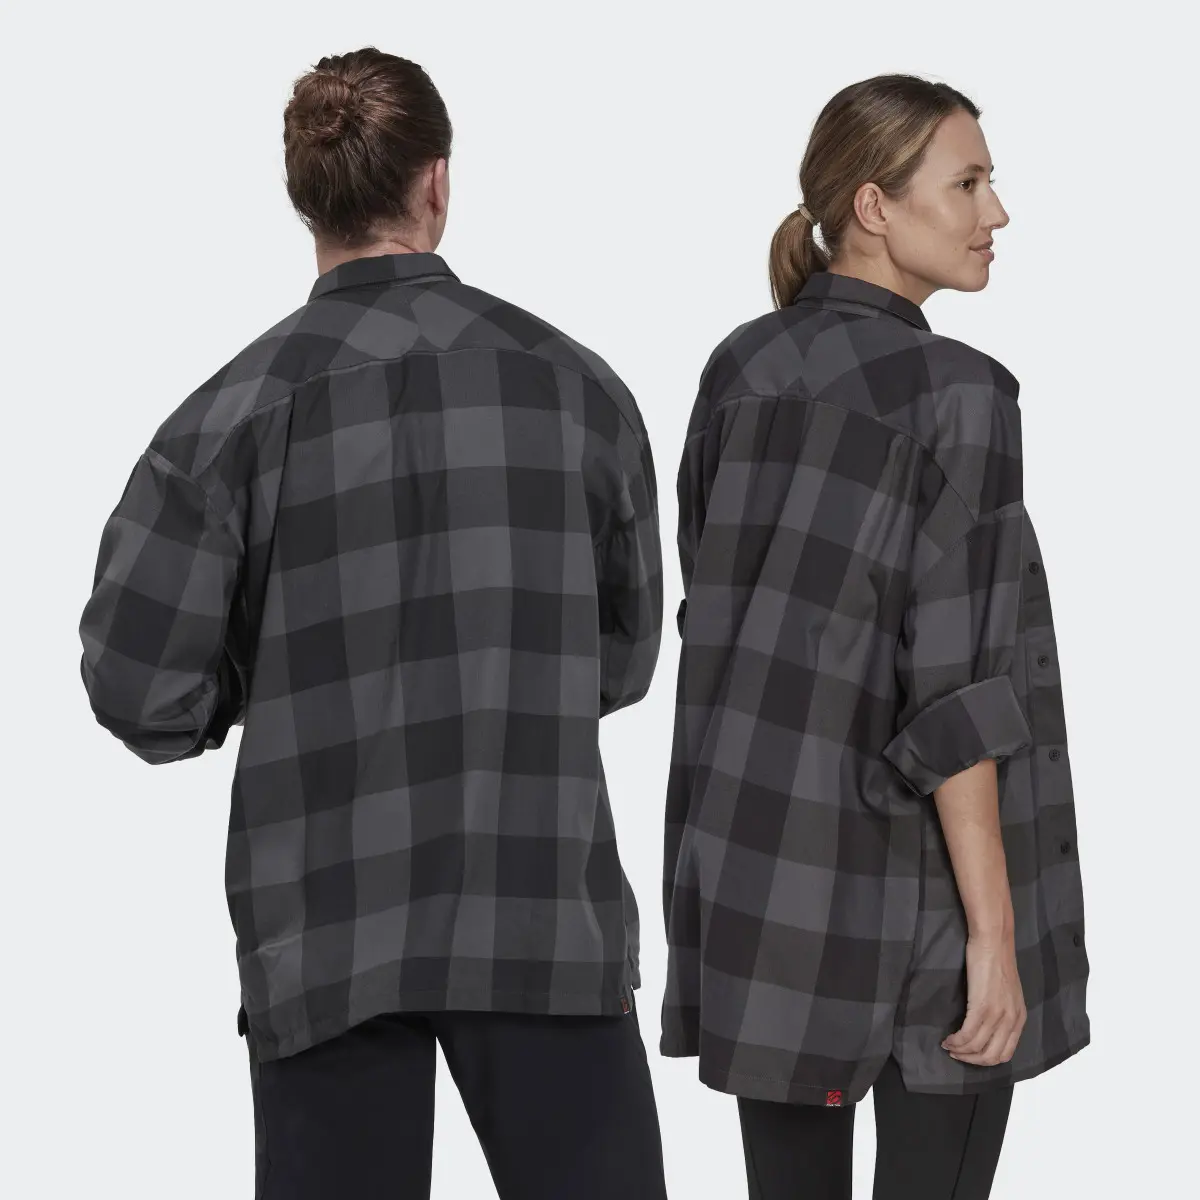 Adidas Five Ten Brand of the Brave Flannel Shirt (uniseks). 2